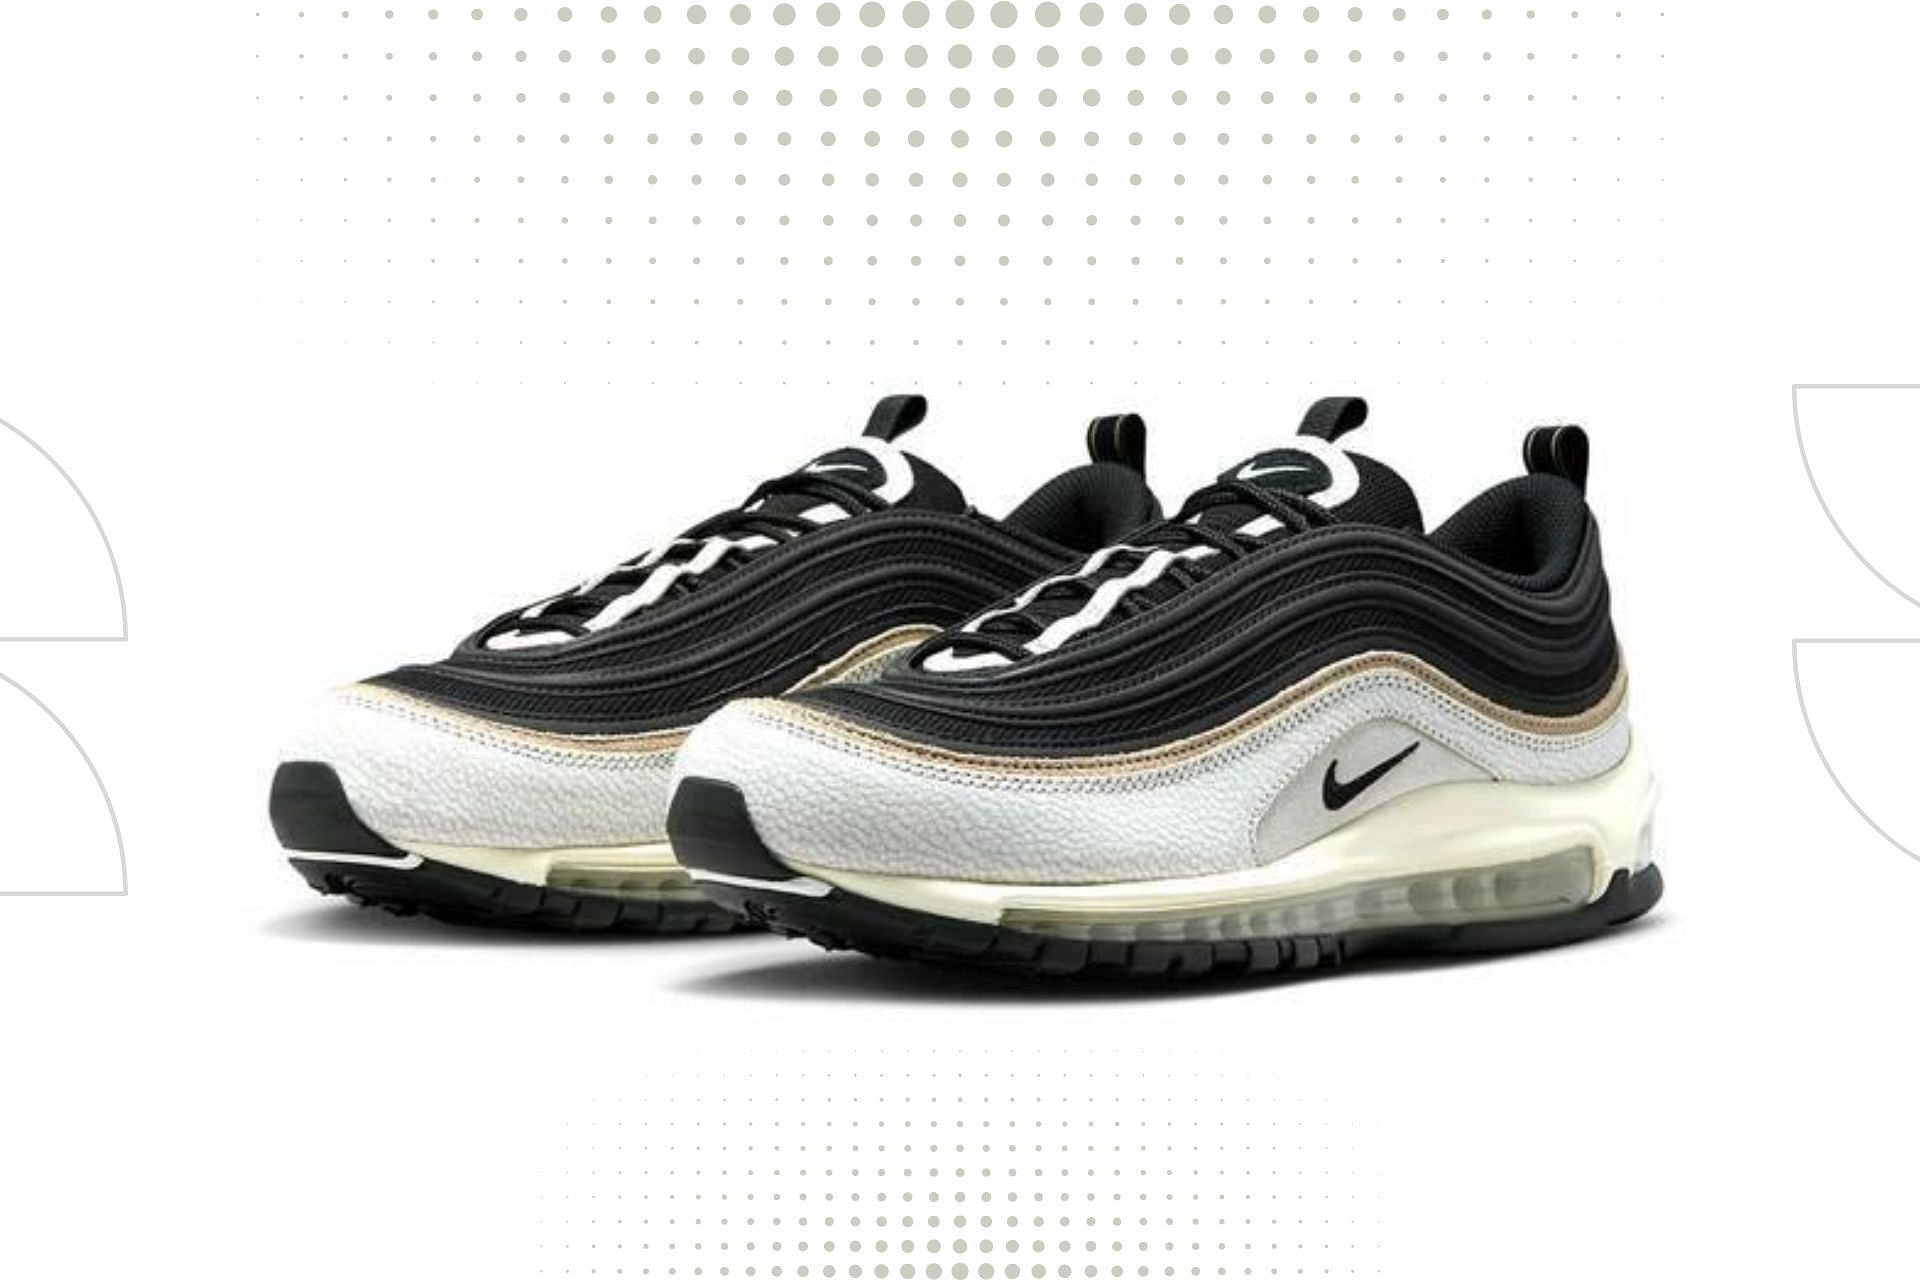 Air Max 97: Nike Air Max 97 “Black/White” Shoes: Where To Buy, Price, And  More Details Explored